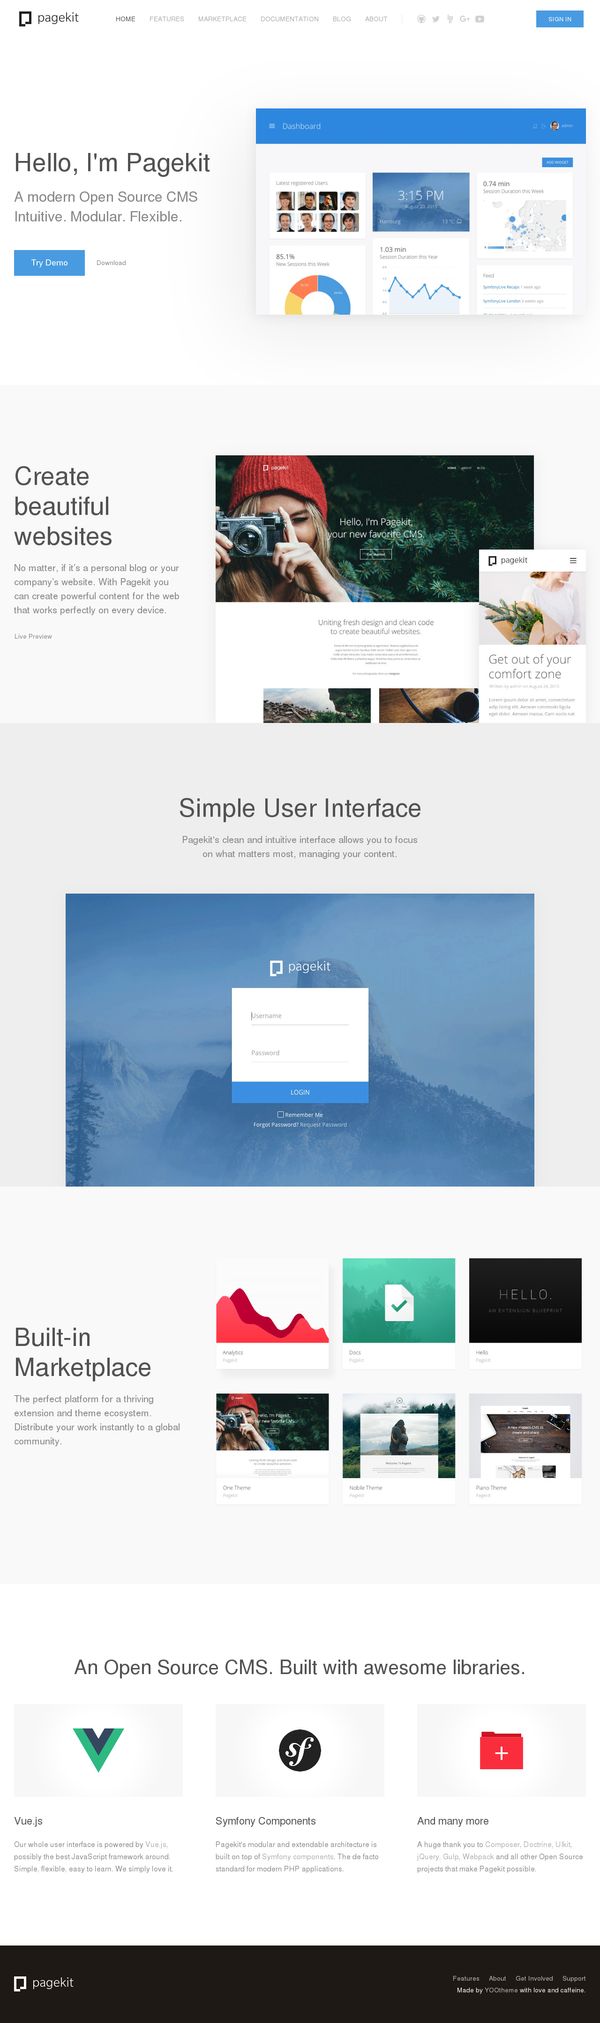 Pagekit | Pagekit - A new modern CMS to create and share - Intuitive. Modular. Flexible.